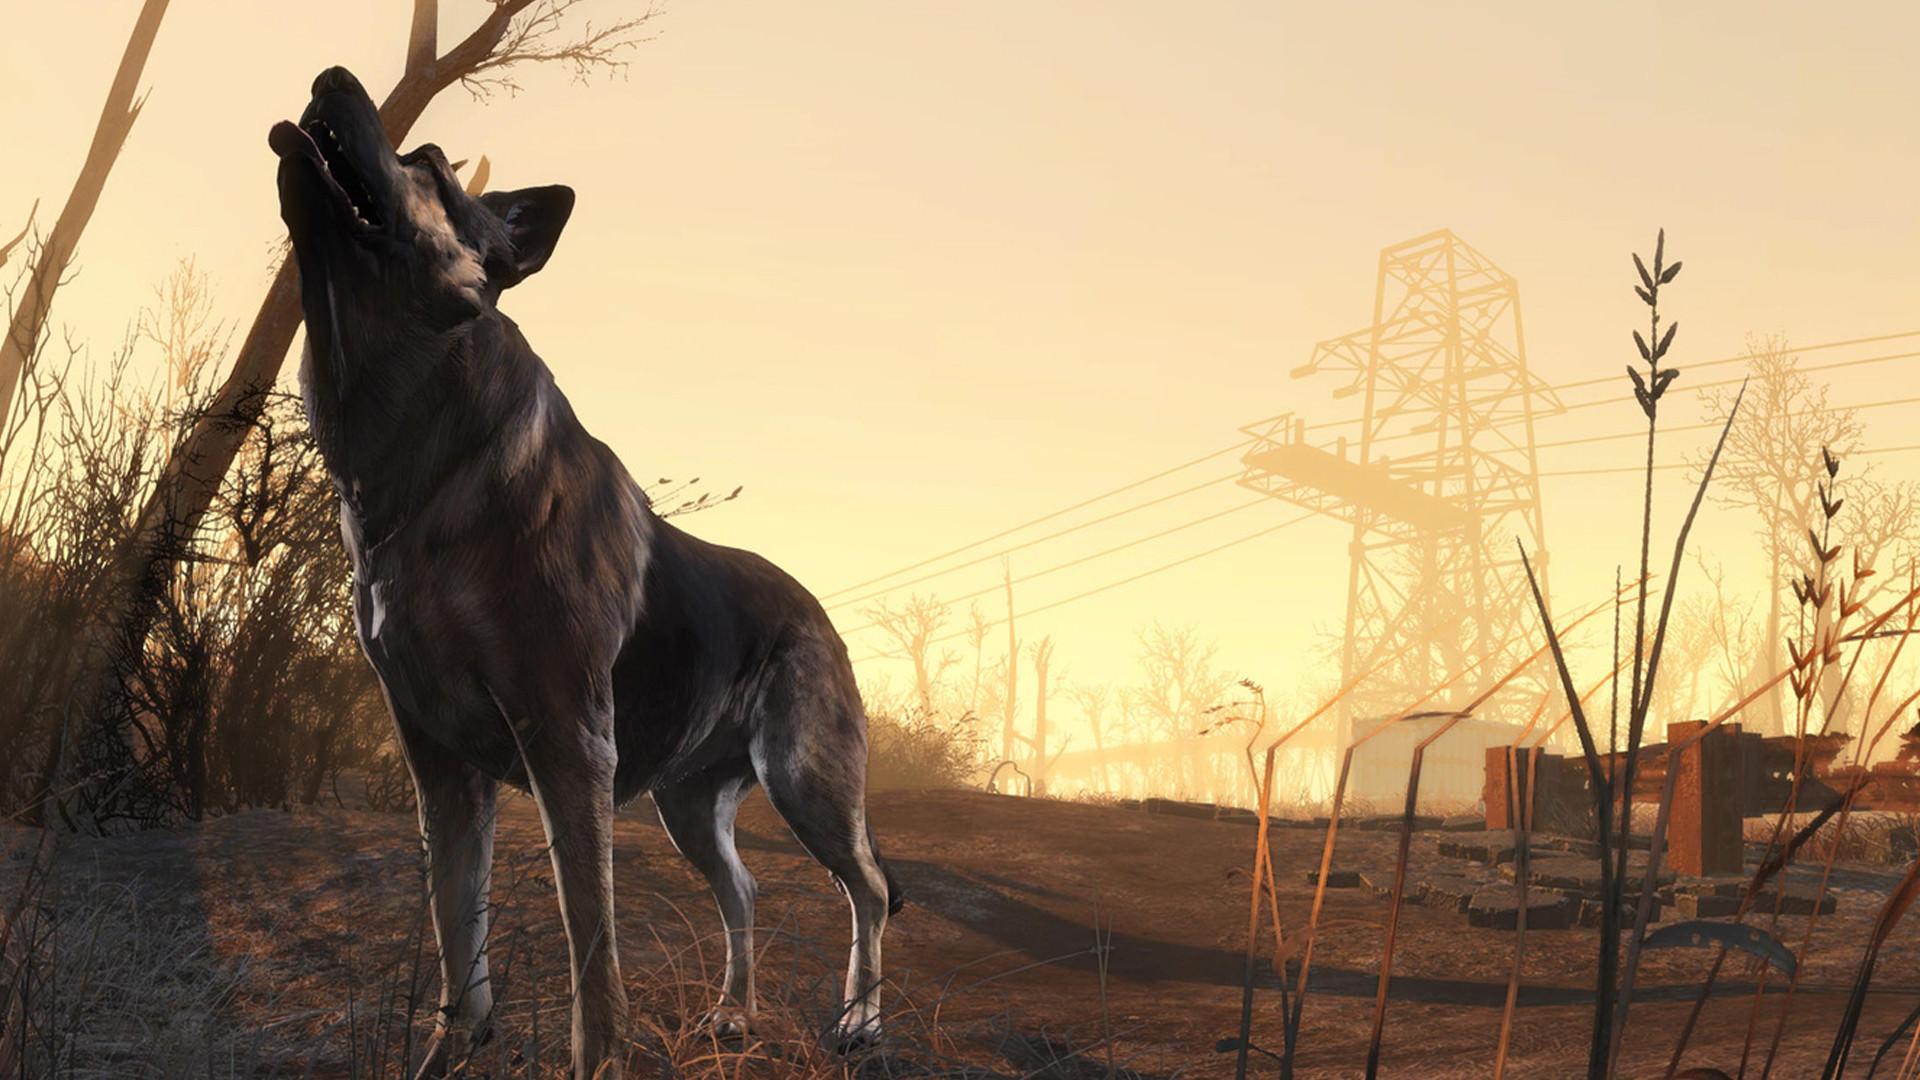 Dog Meat Fallout 4 Wallpapers Top Free Dog Meat Fallout 4 Backgrounds Wallpaperaccess